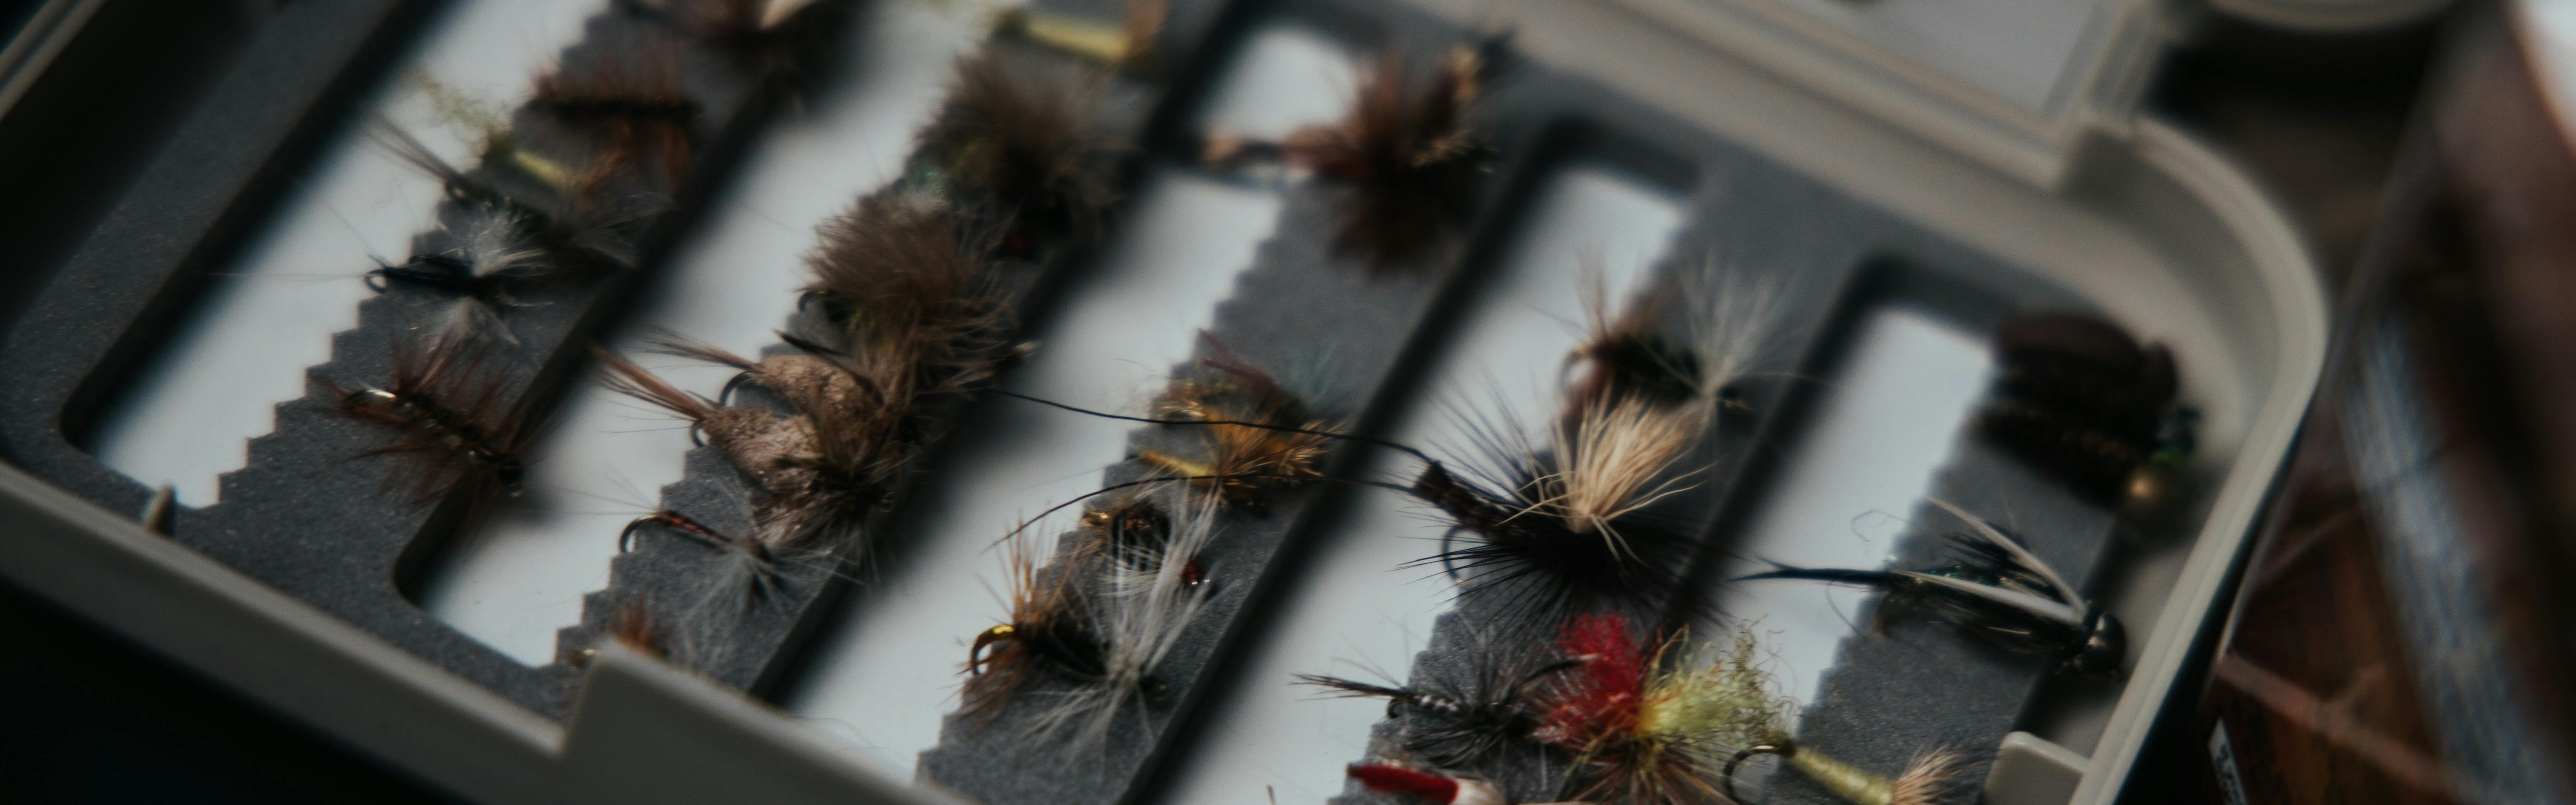 Creating Order in Your Fly Box: Fly Box Organization Guide(DVD